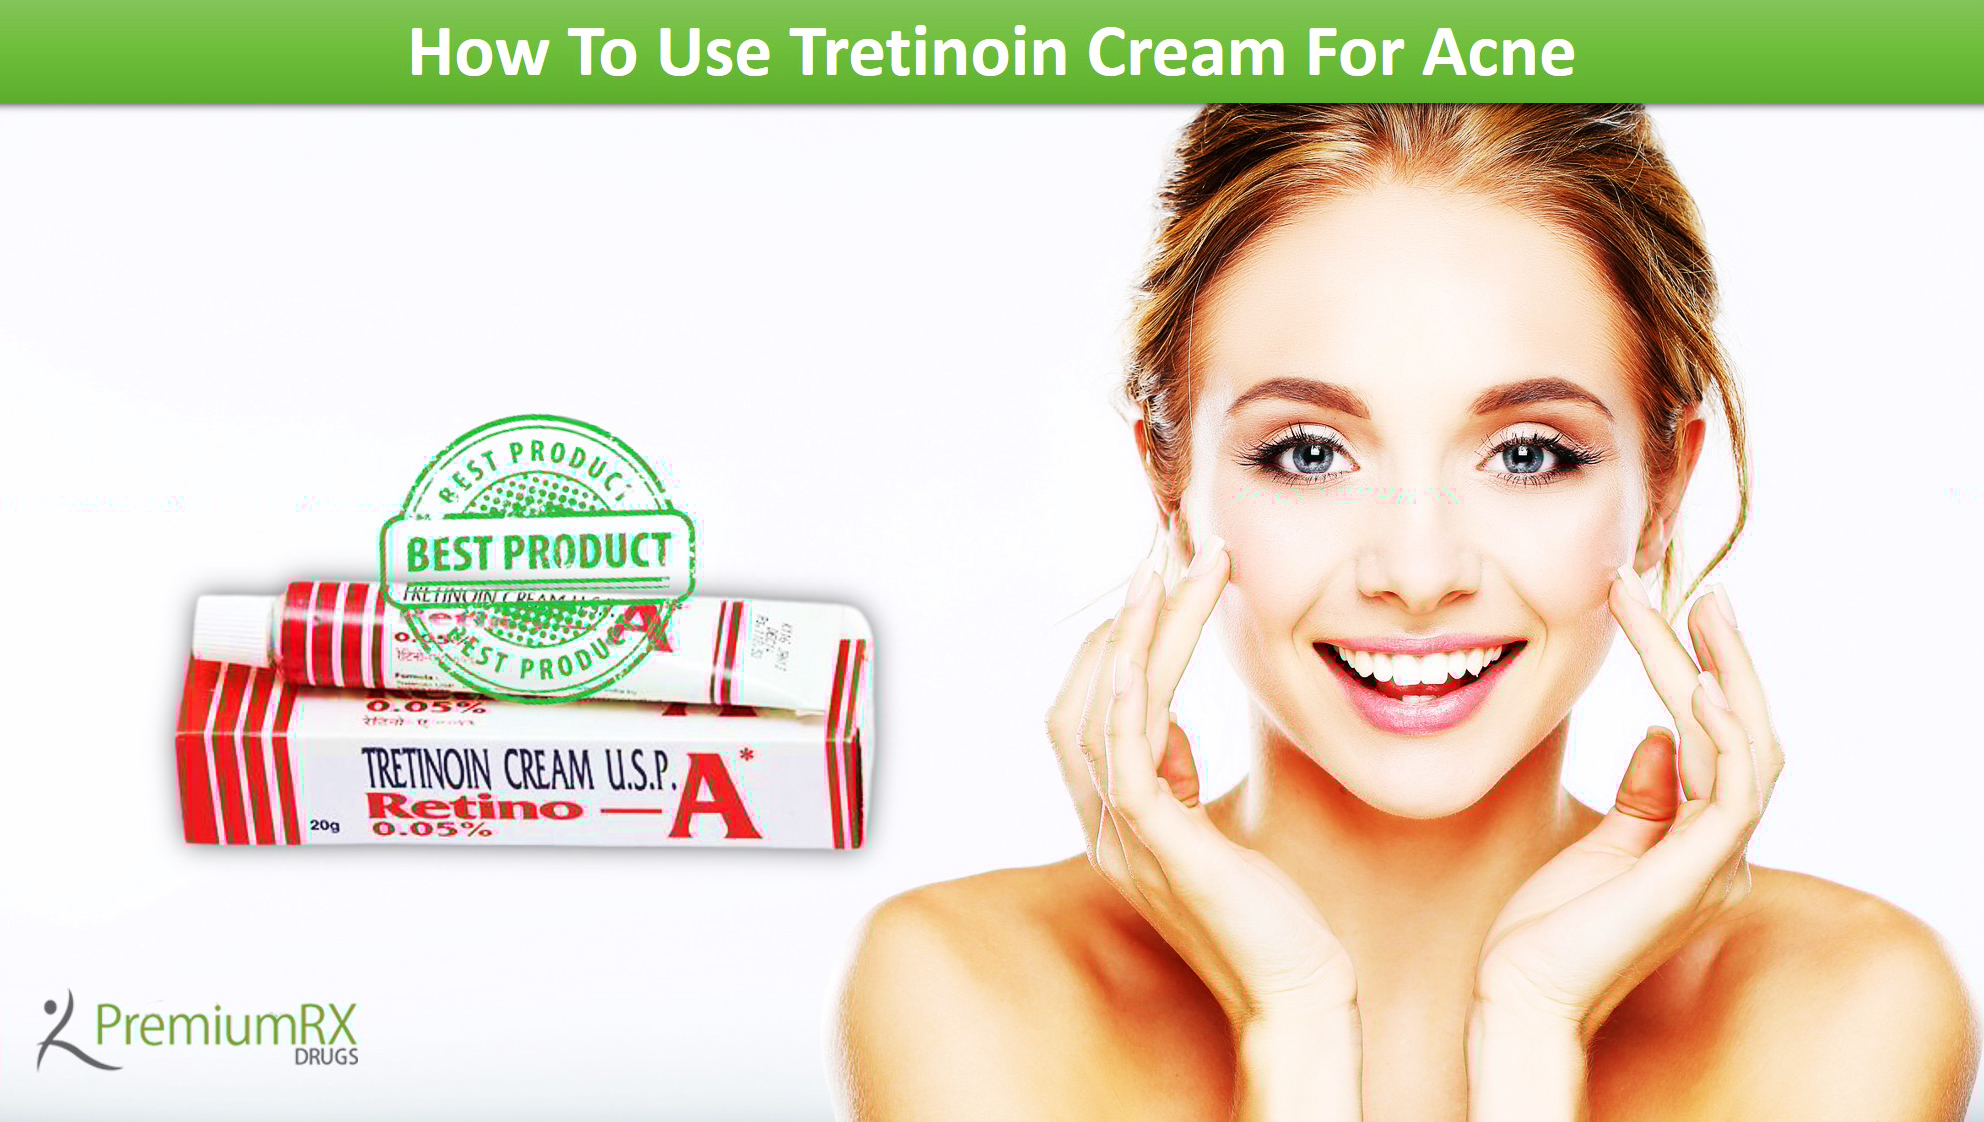 How To Use Tretinoin Cream For Acne